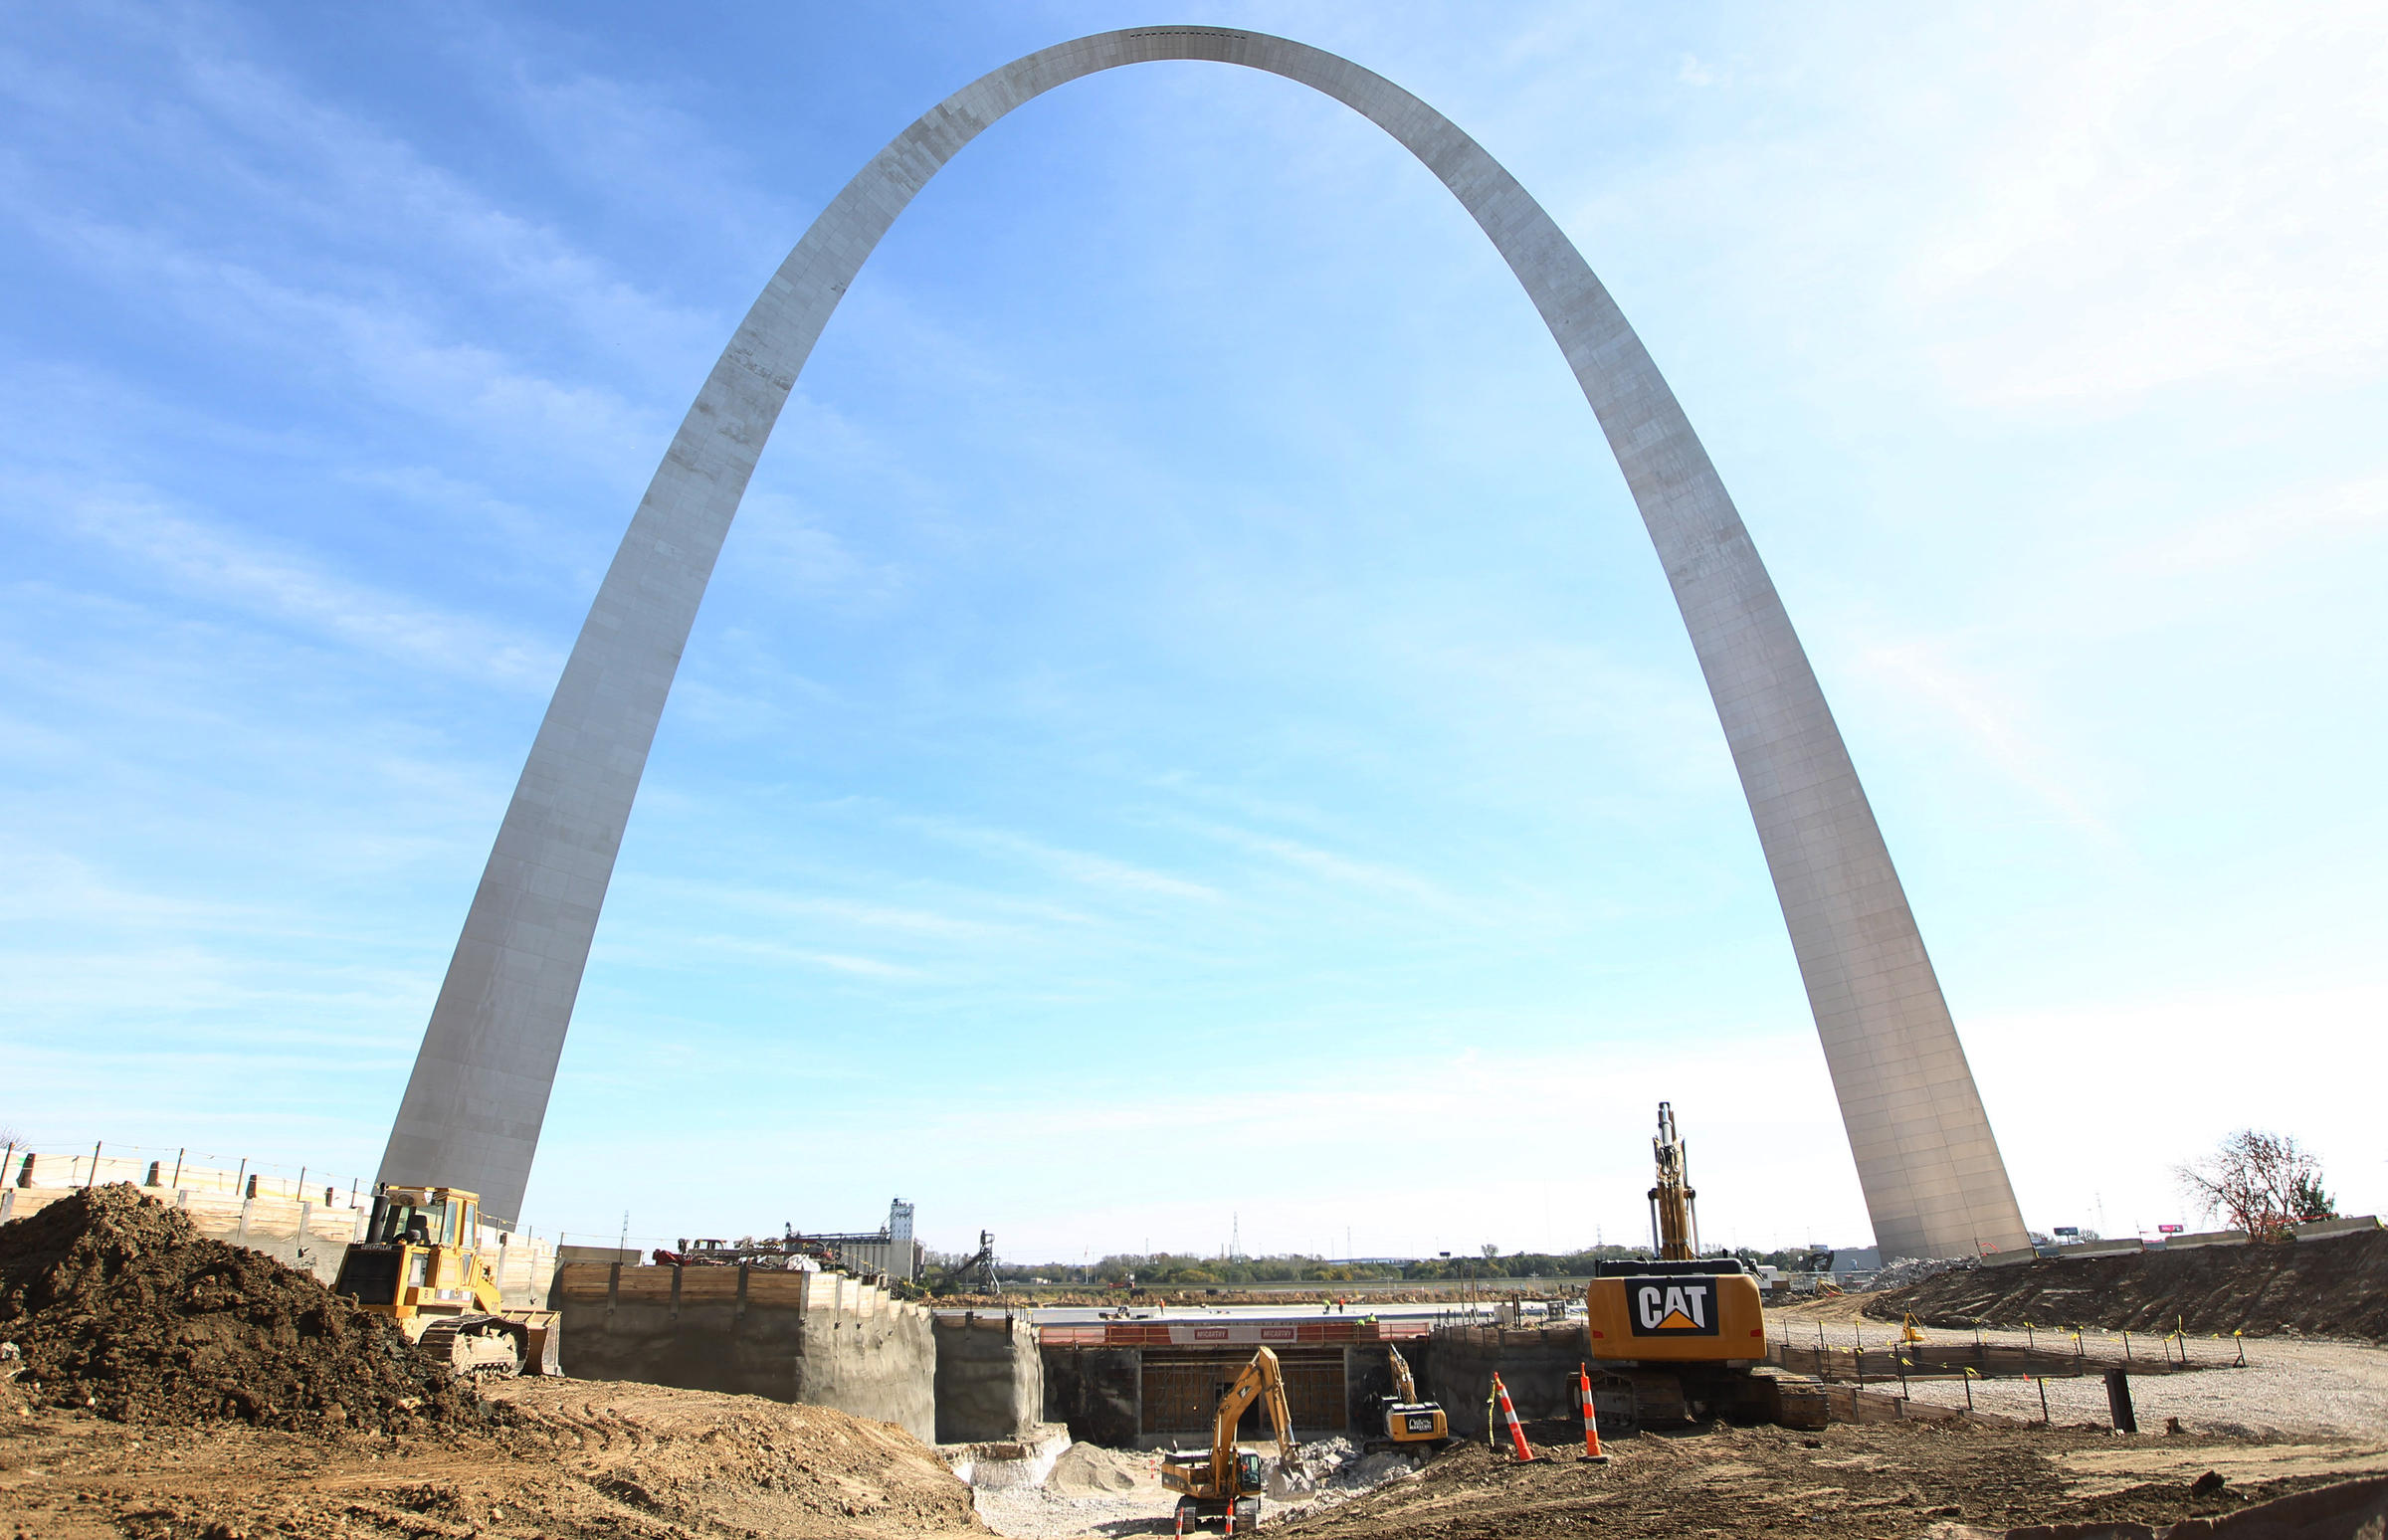 As Gateway Arch Turns 50, Its Message Gets Reframed | KUOW News and Information